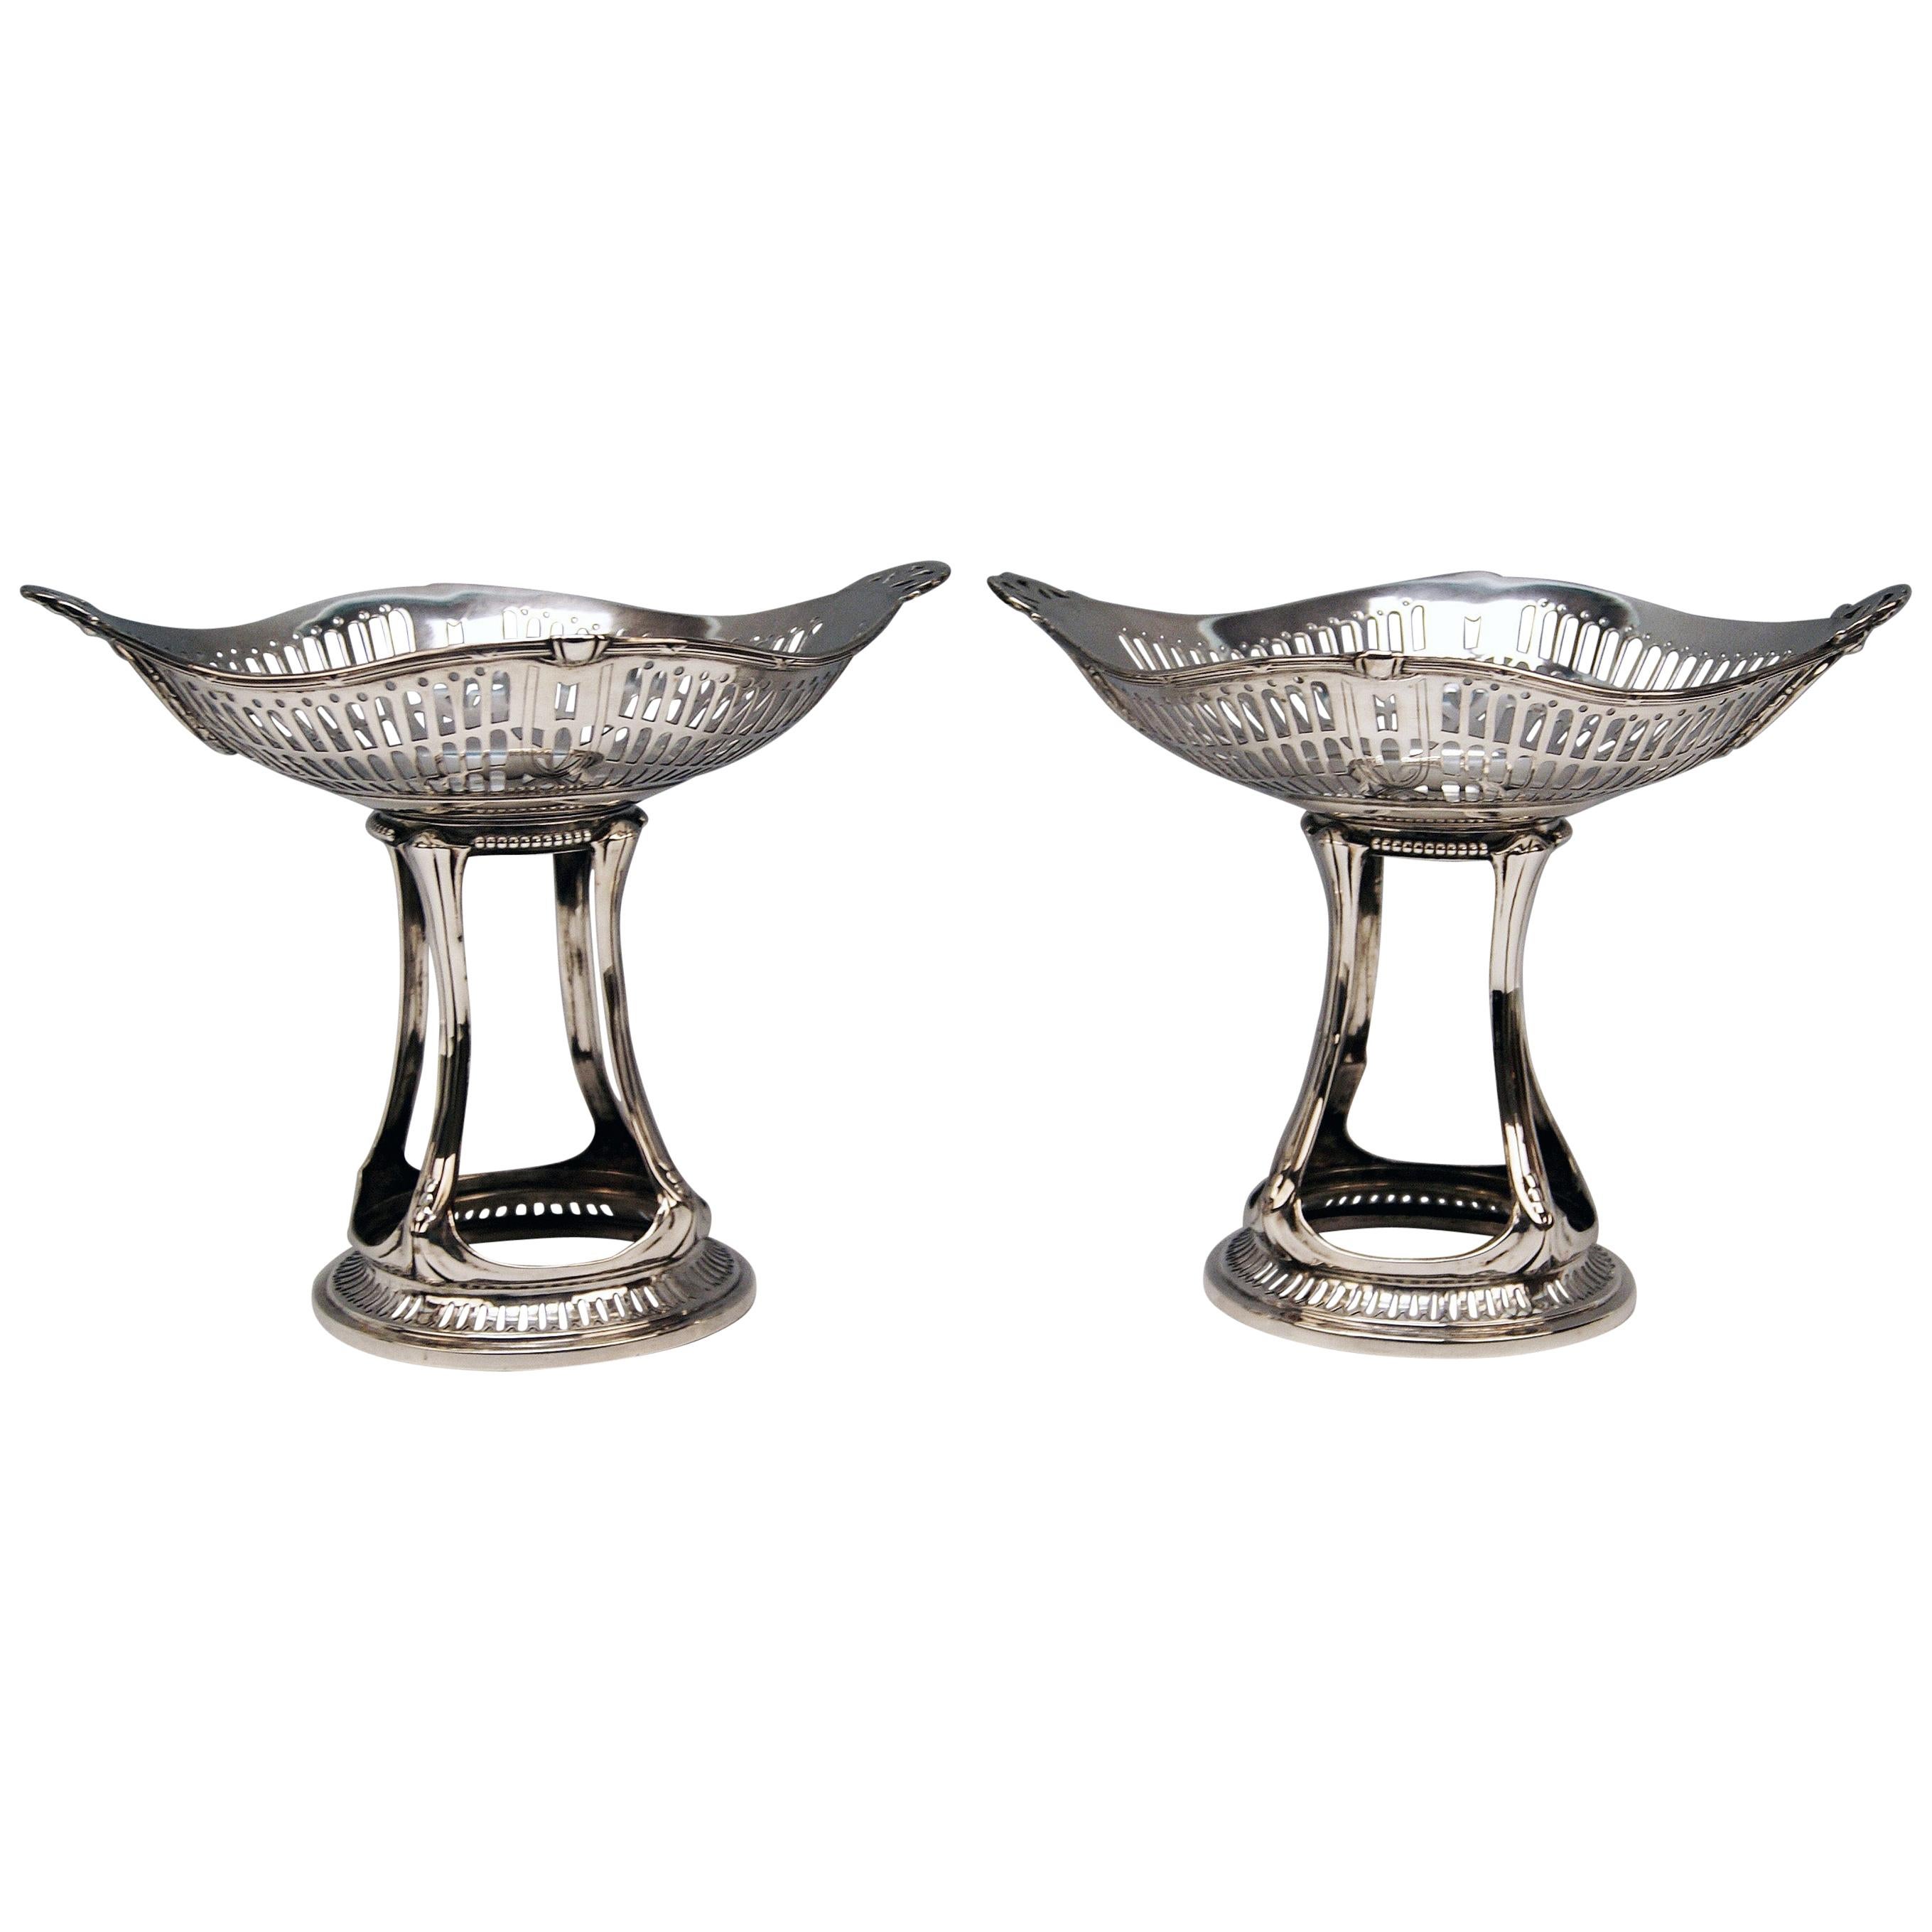 Silver Art Nouveau Pair of Centrepieces Holders Bruckmann and Sons, Germany 1900